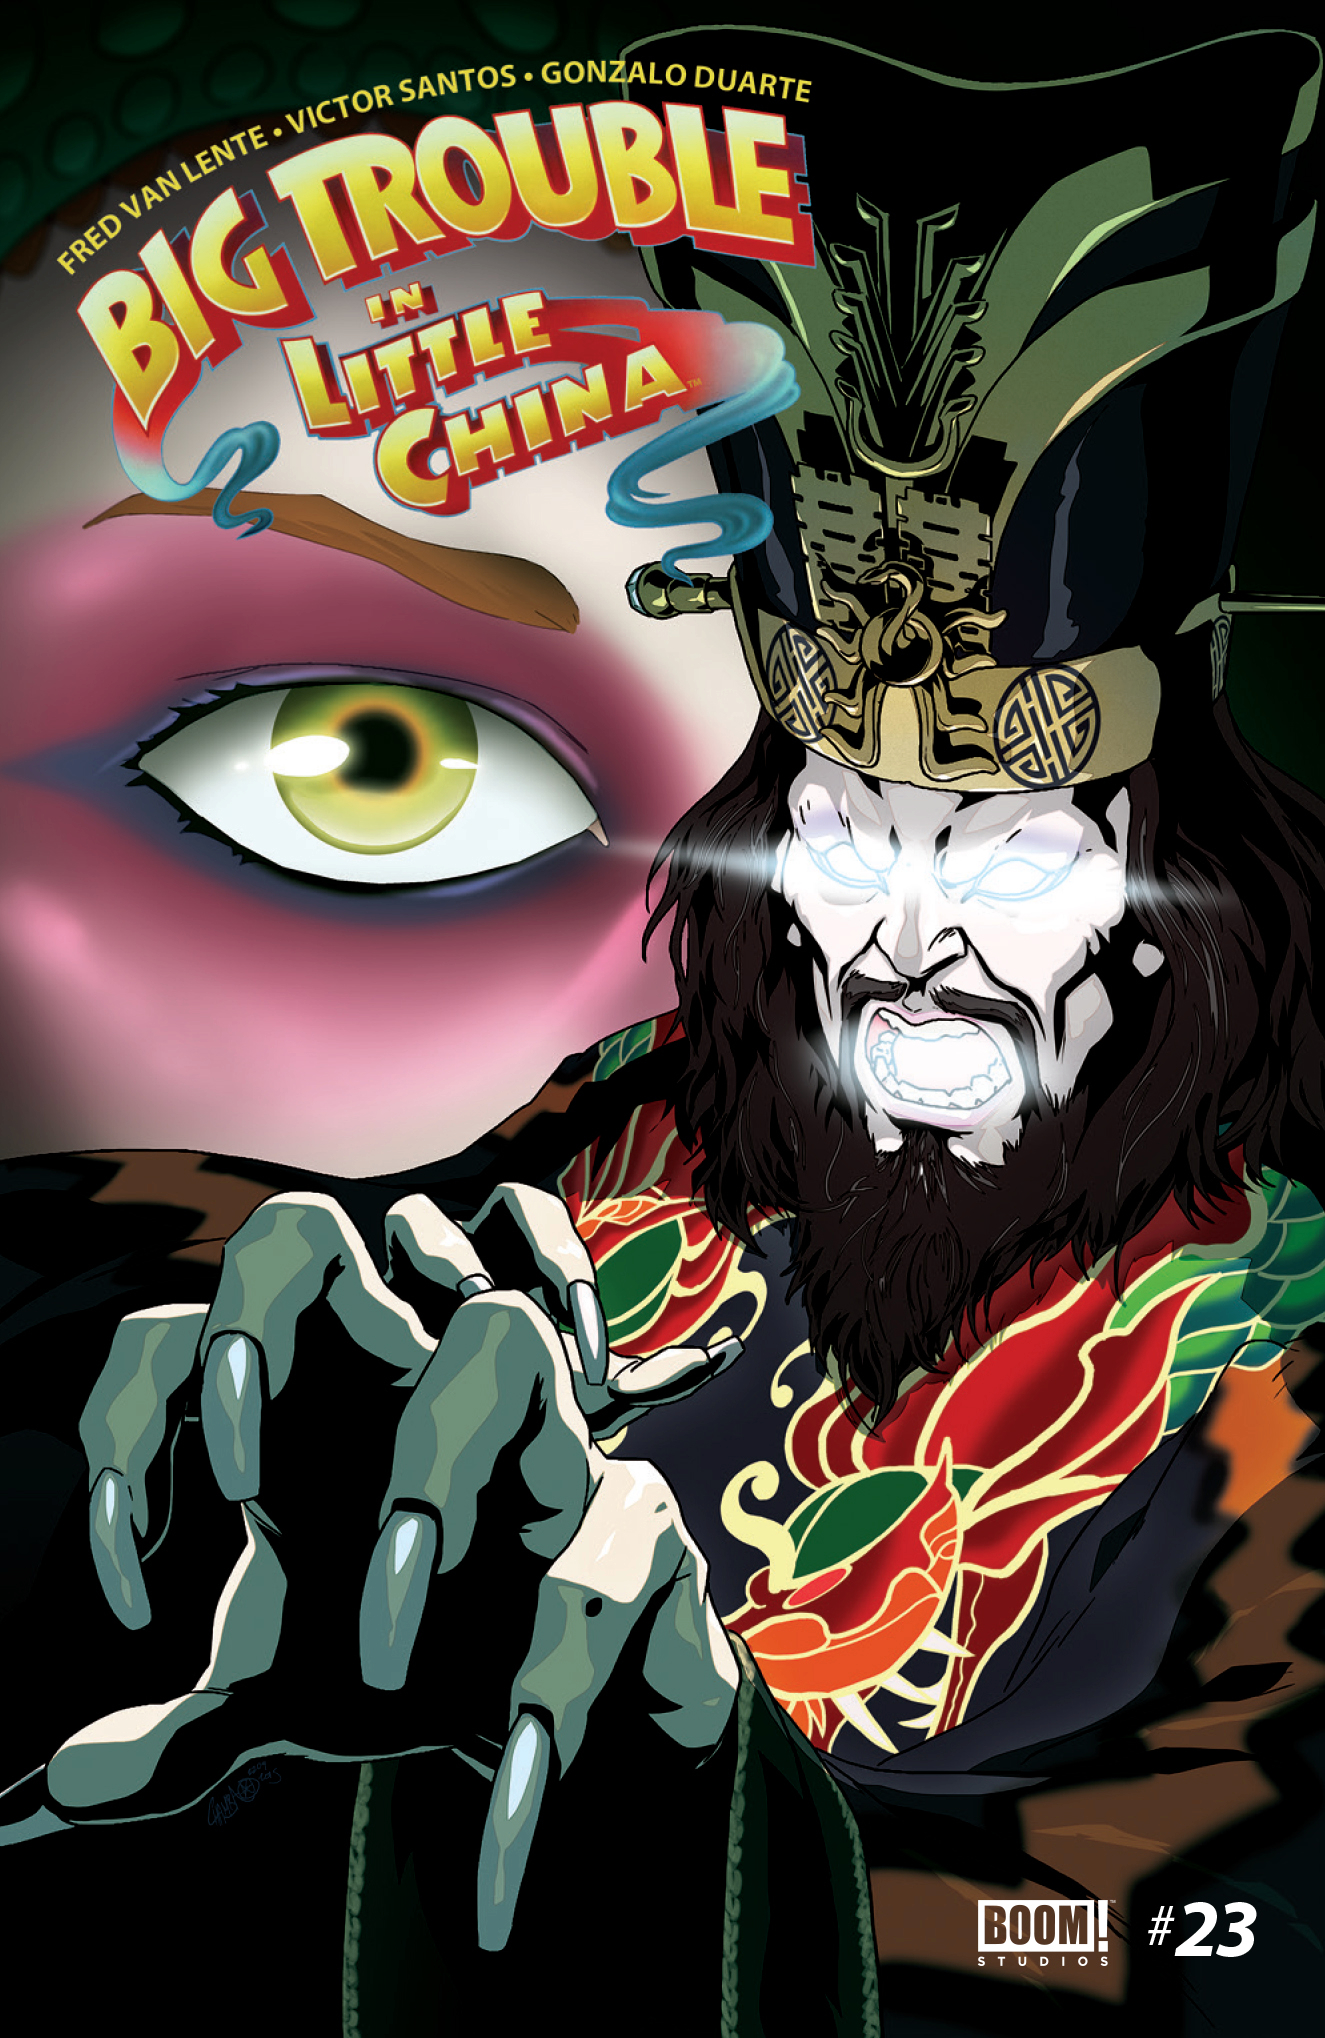 BIG TROUBLE IN LITTLE CHINA #23